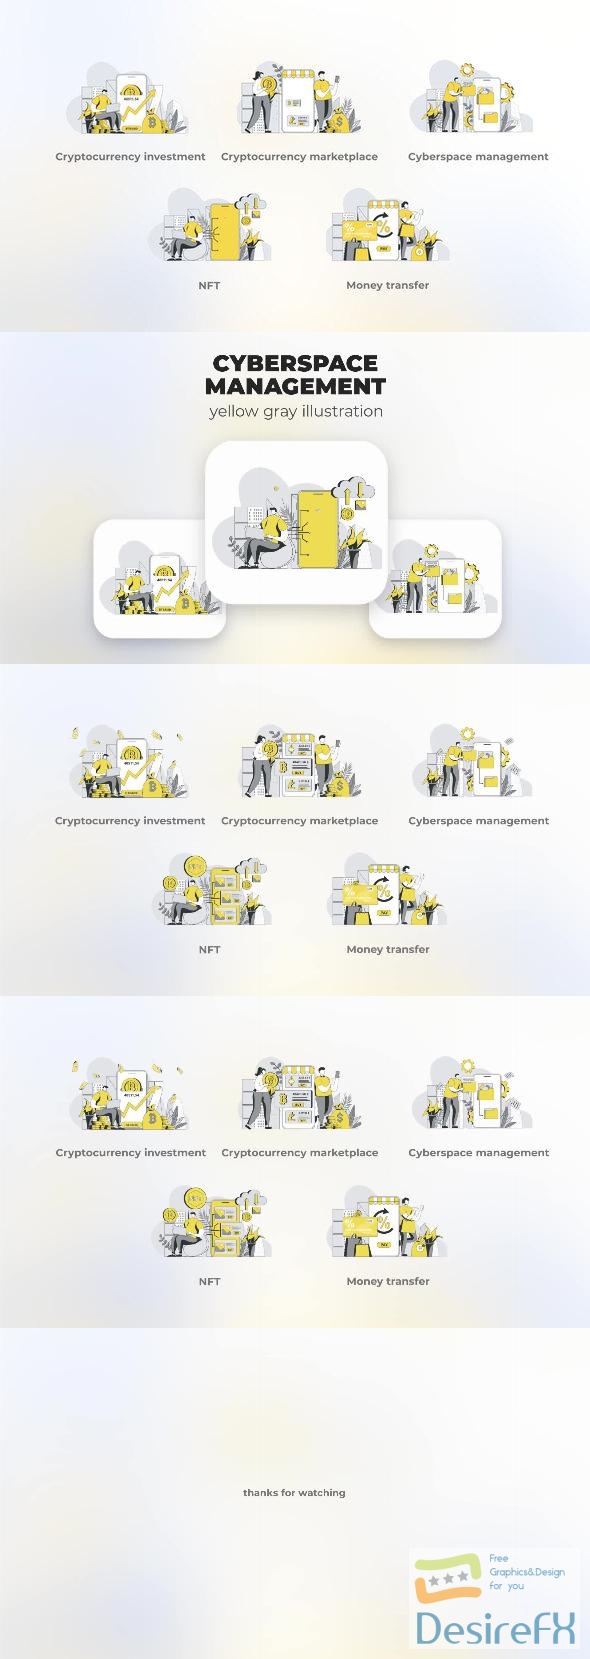 VideoHive Cyberspace Management - Yellow Gray Flat Illustration 44638039